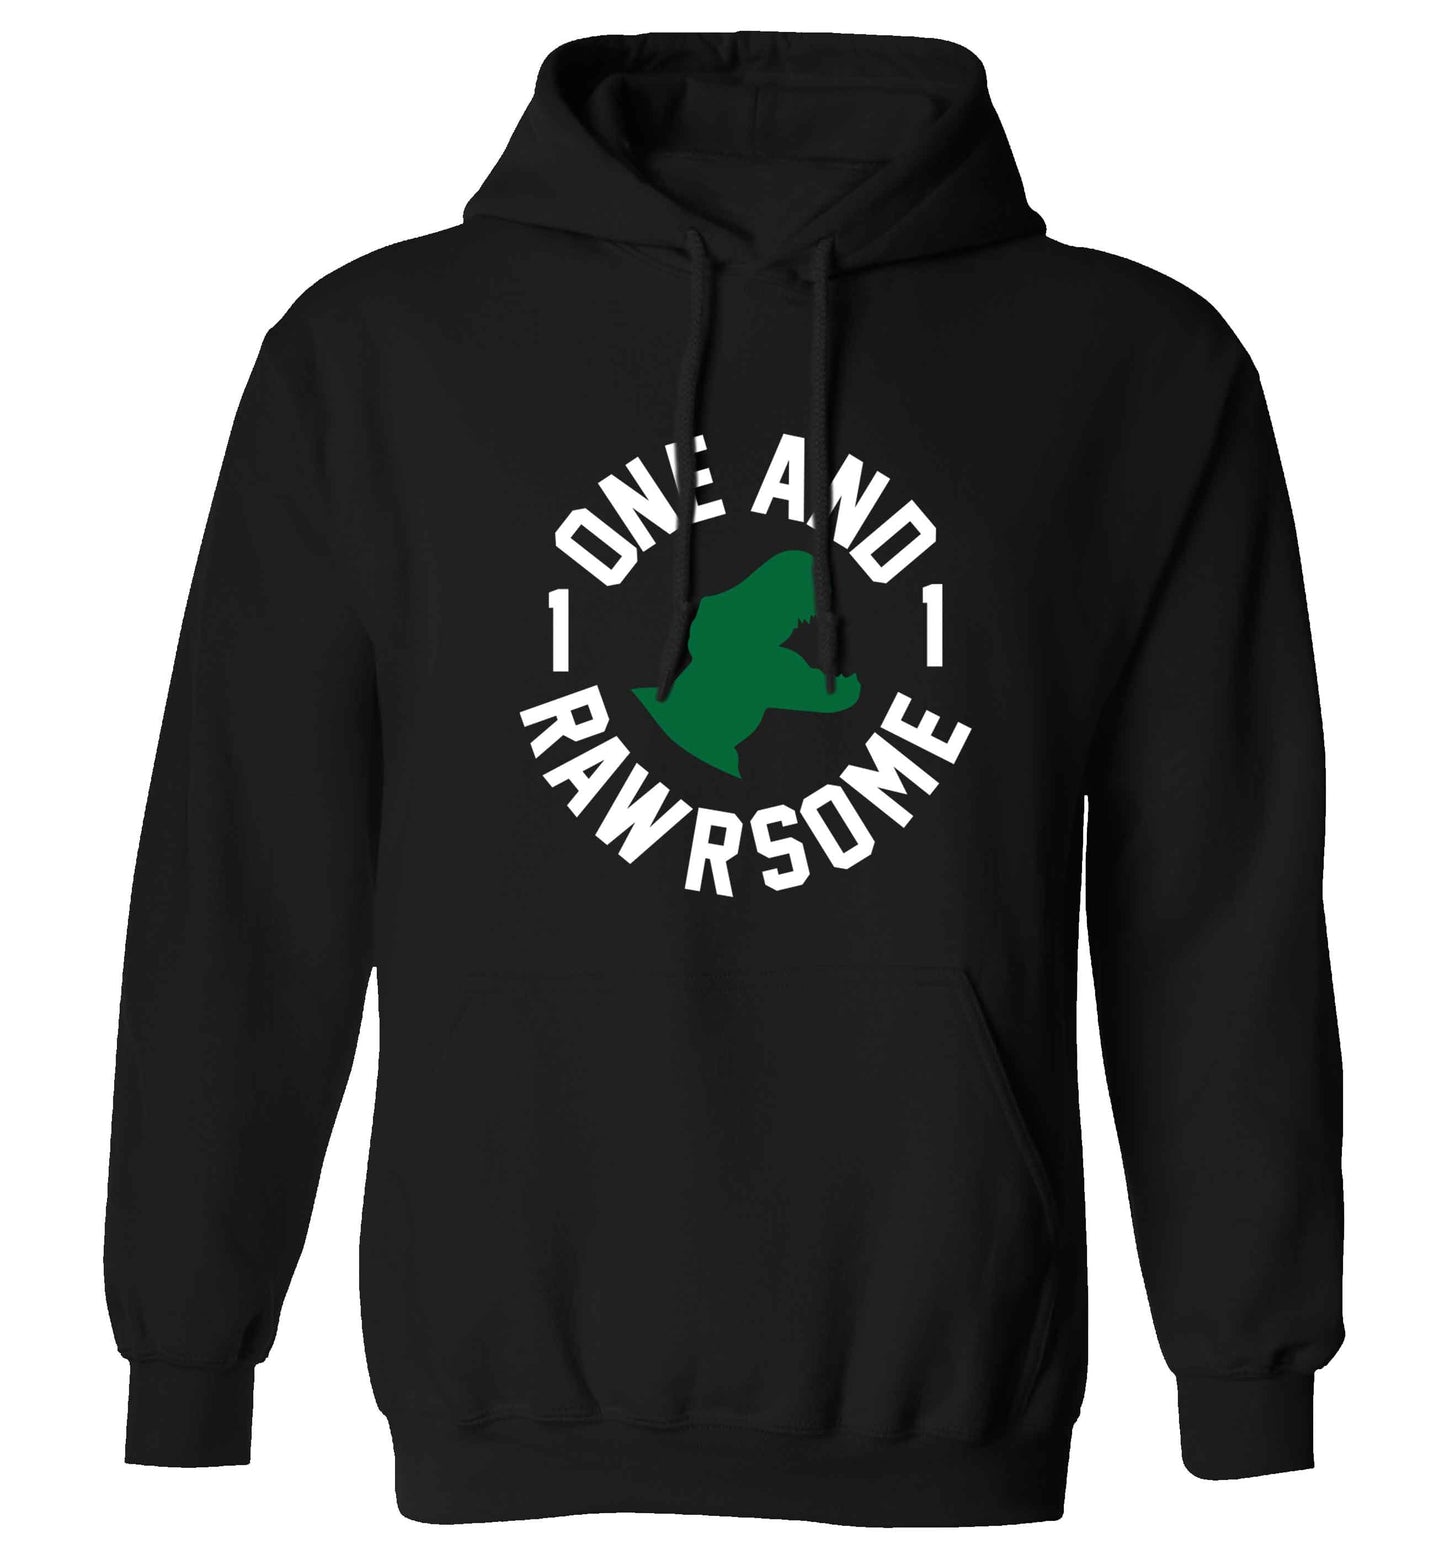 One and Rawrsome adults unisex black hoodie 2XL